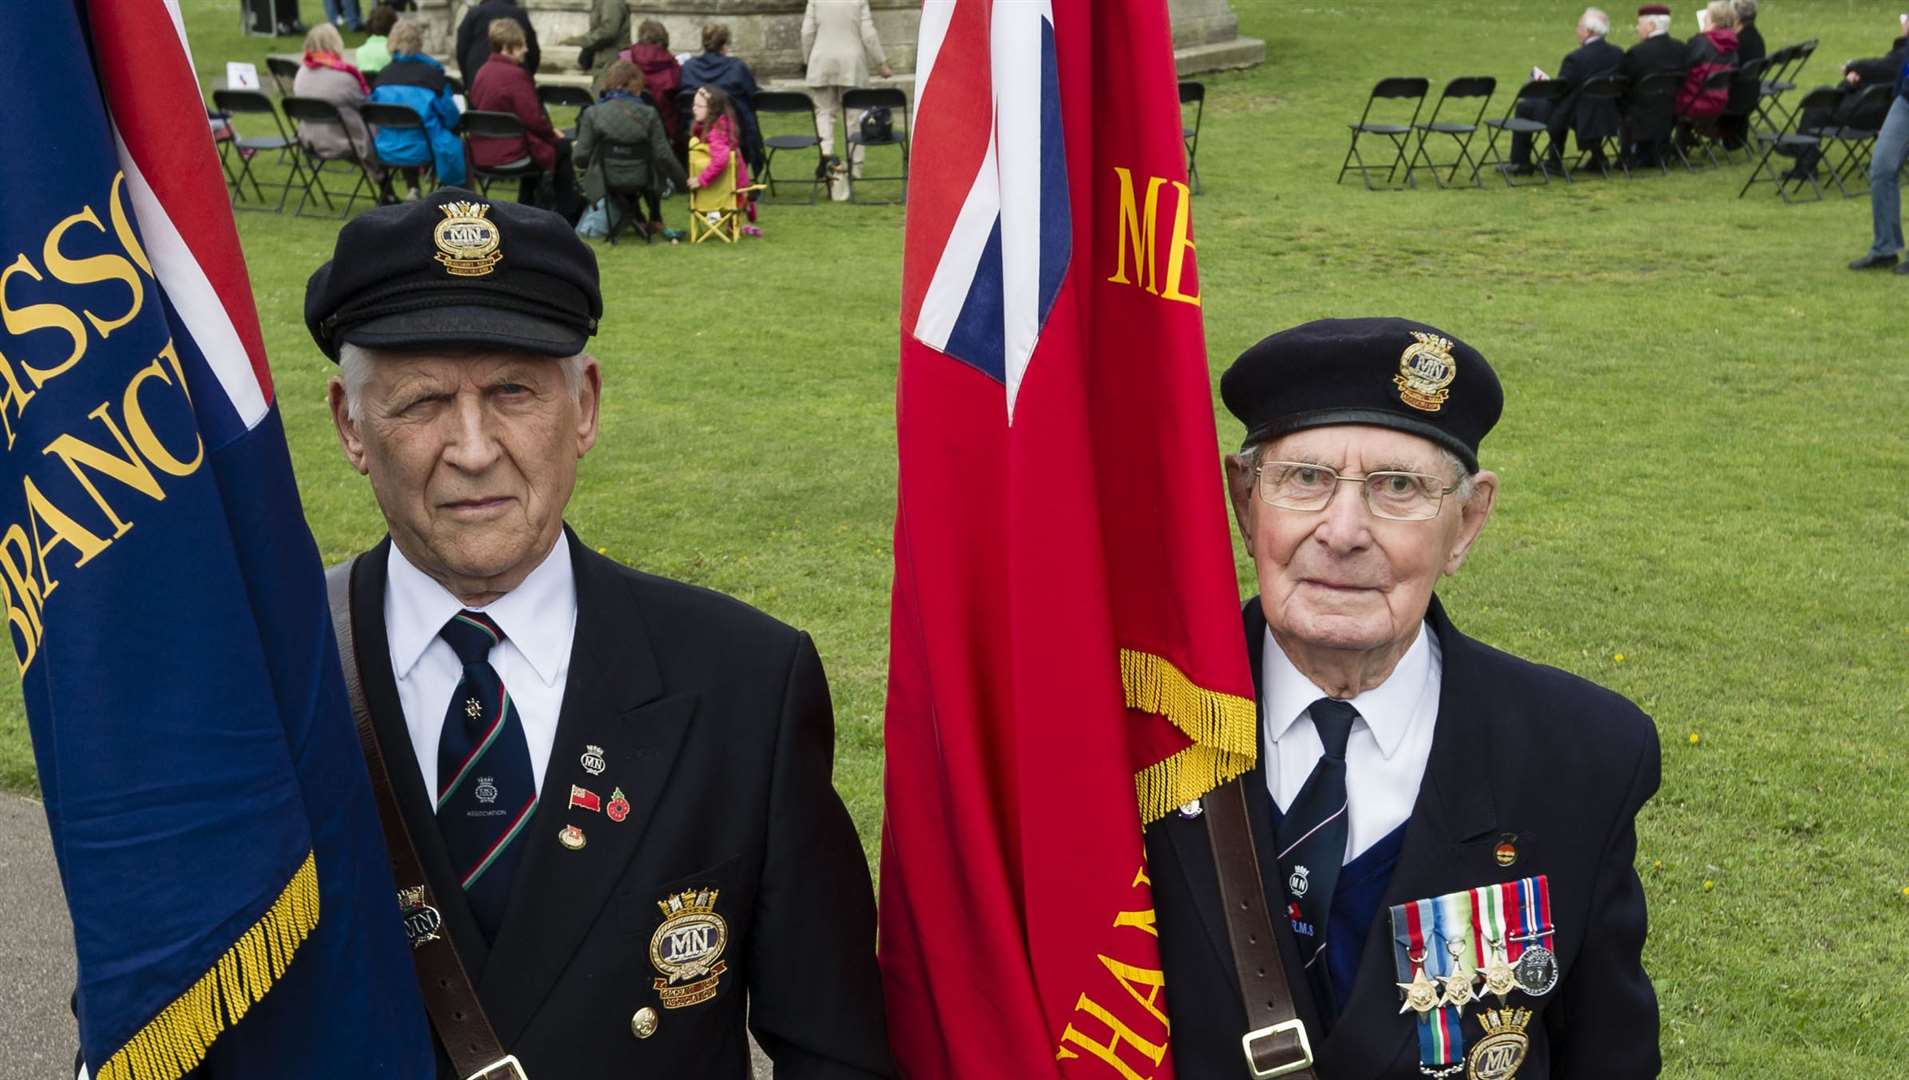 John Stanford, left, and Wallace Gooch marking the 70th Anniversary of VE Day, at Fort Gardens, Gravesend